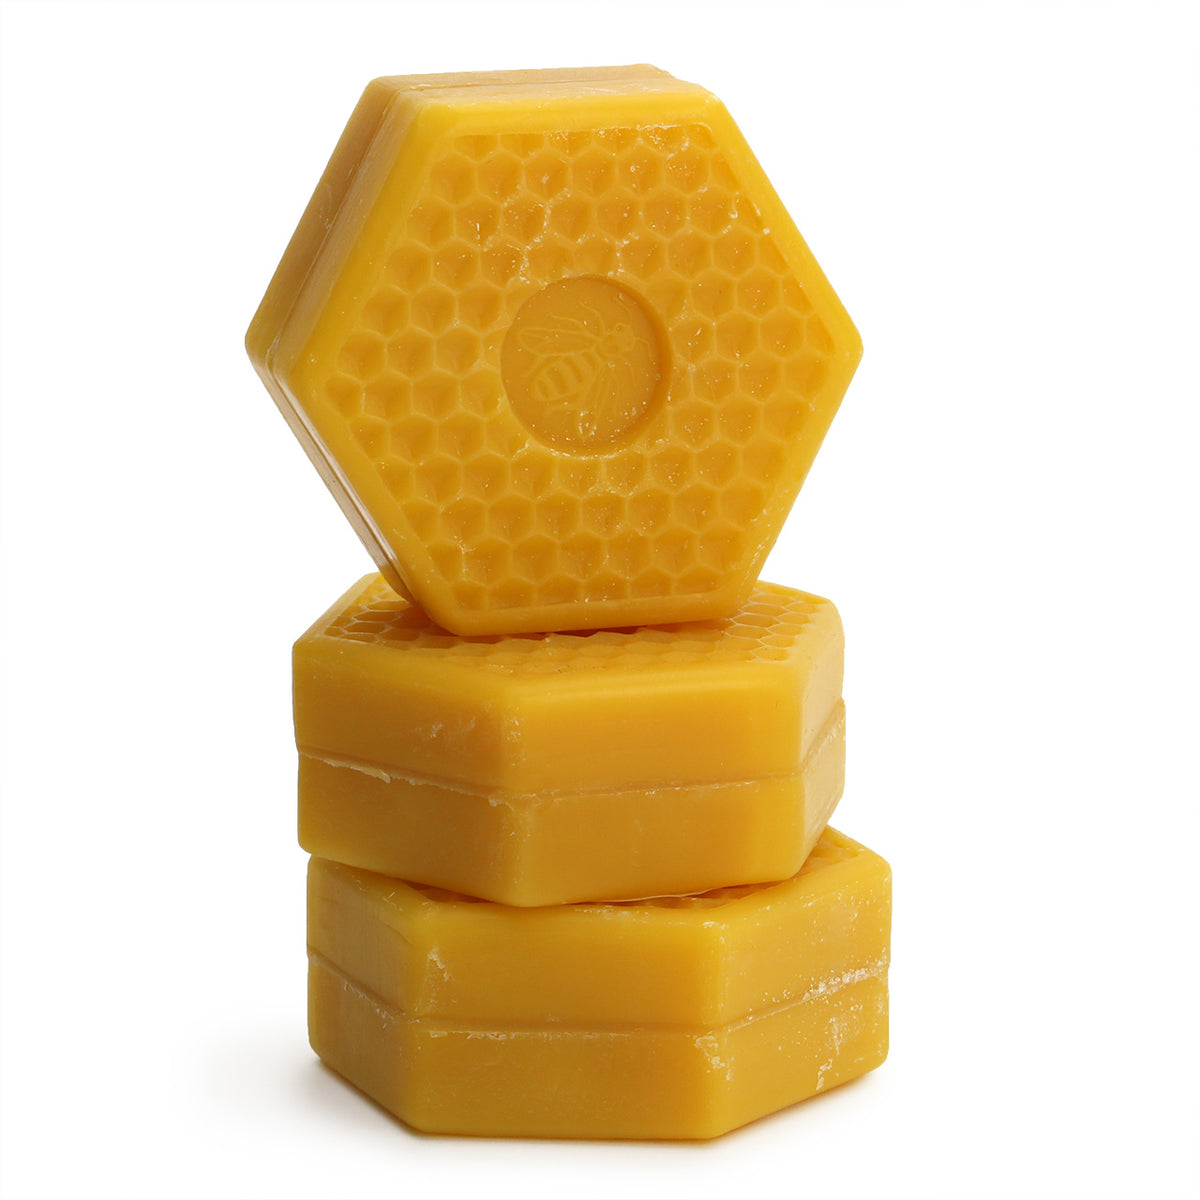 A stack of three Speick honey soaps which are bought as singles and smell warm and comforting.